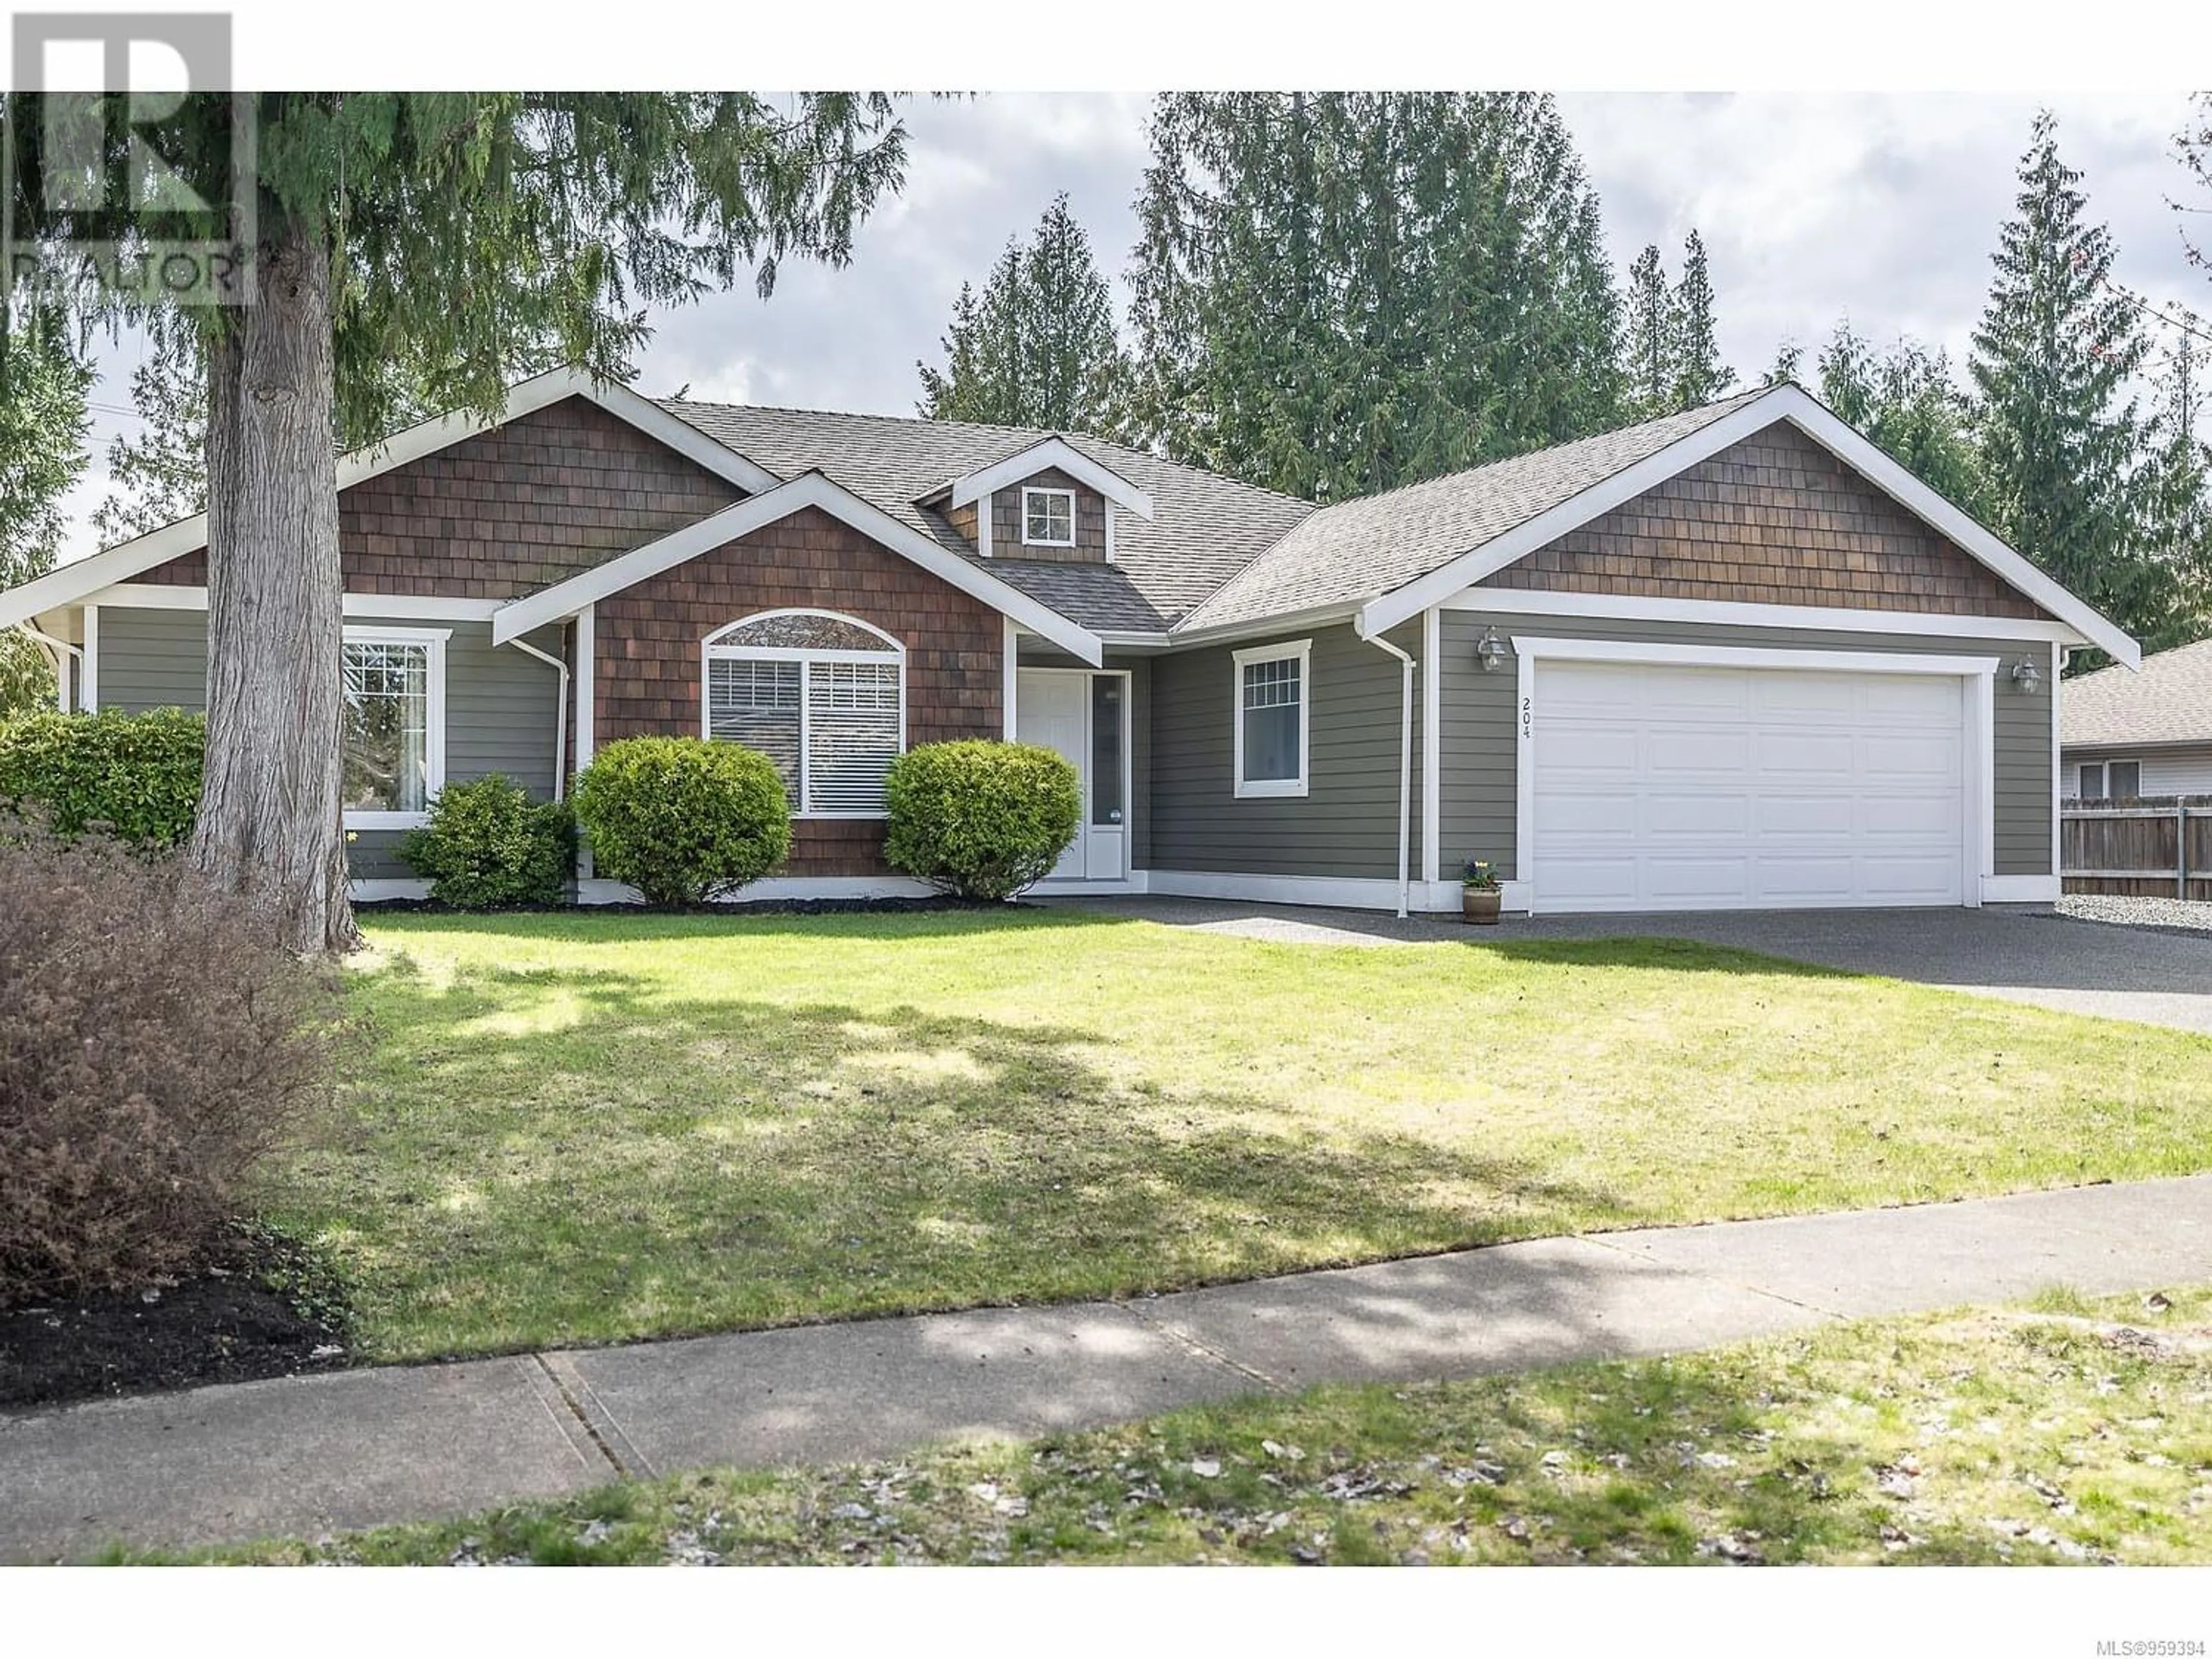 Frontside or backside of a home for 204 SATURNA Dr, Qualicum Beach British Columbia V9K2P5